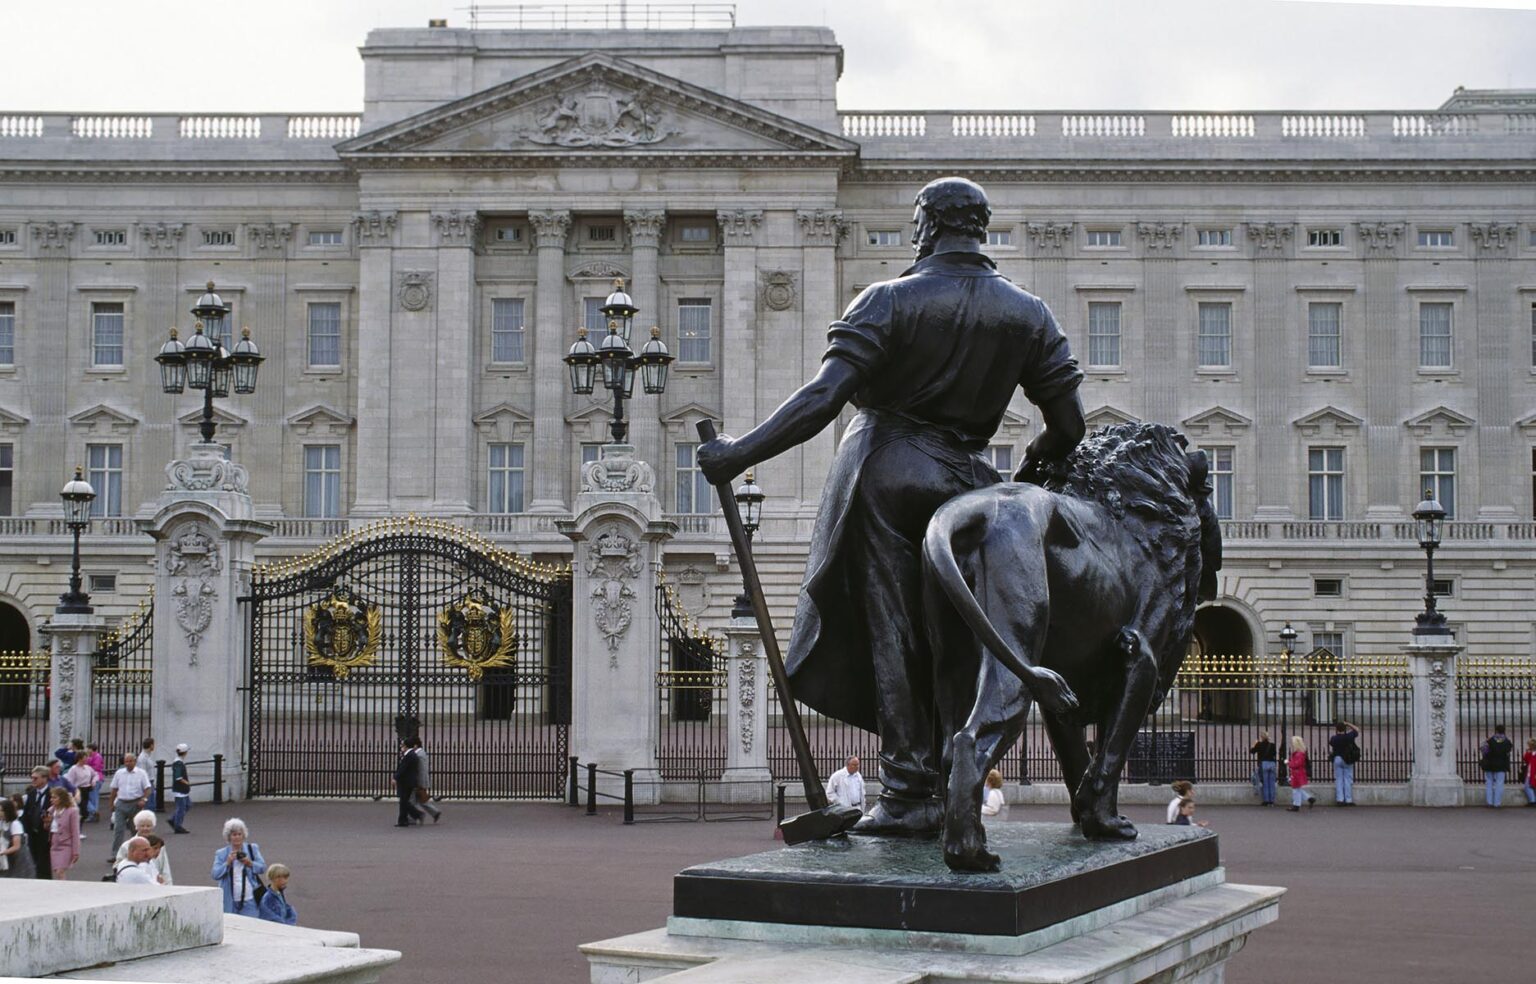 Statue of MAN & LION are part of the VICTORIA MEMORIAL & the BUCKINGHAM PALACE - LONDON